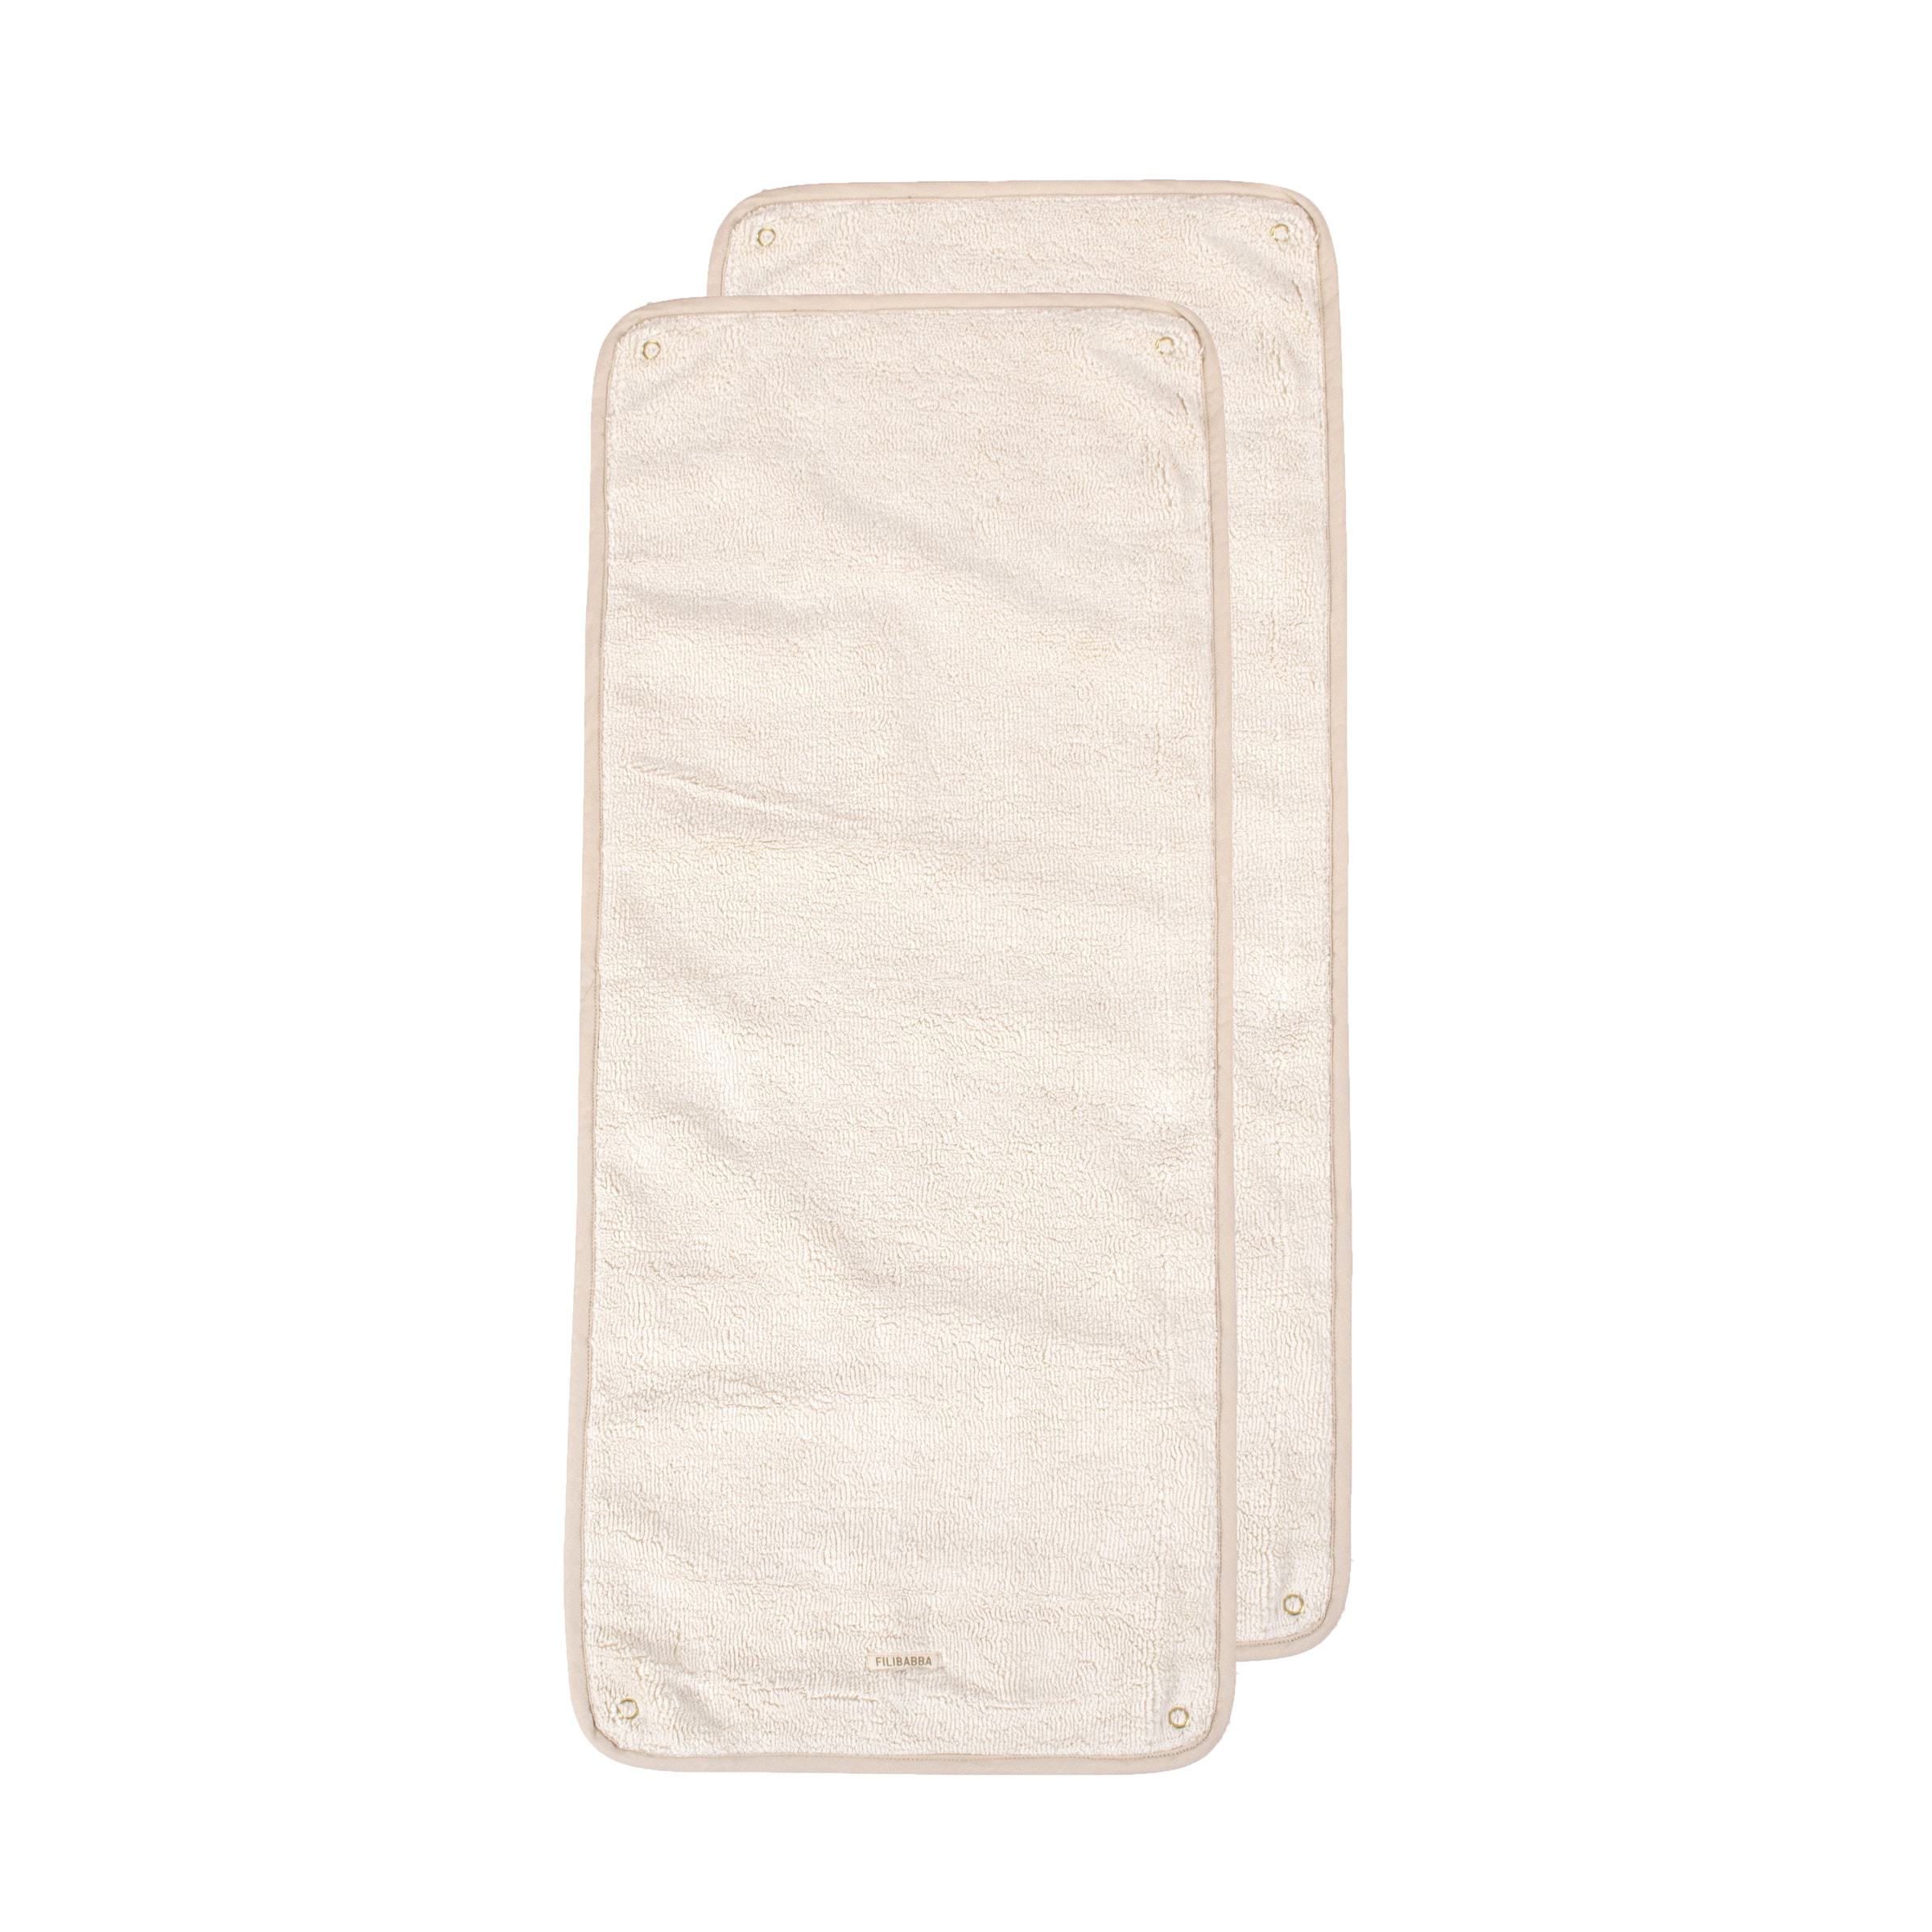 Filibabba - Middle layer 2-pack for Changing Pad -  Doeskin (FI-CP005)